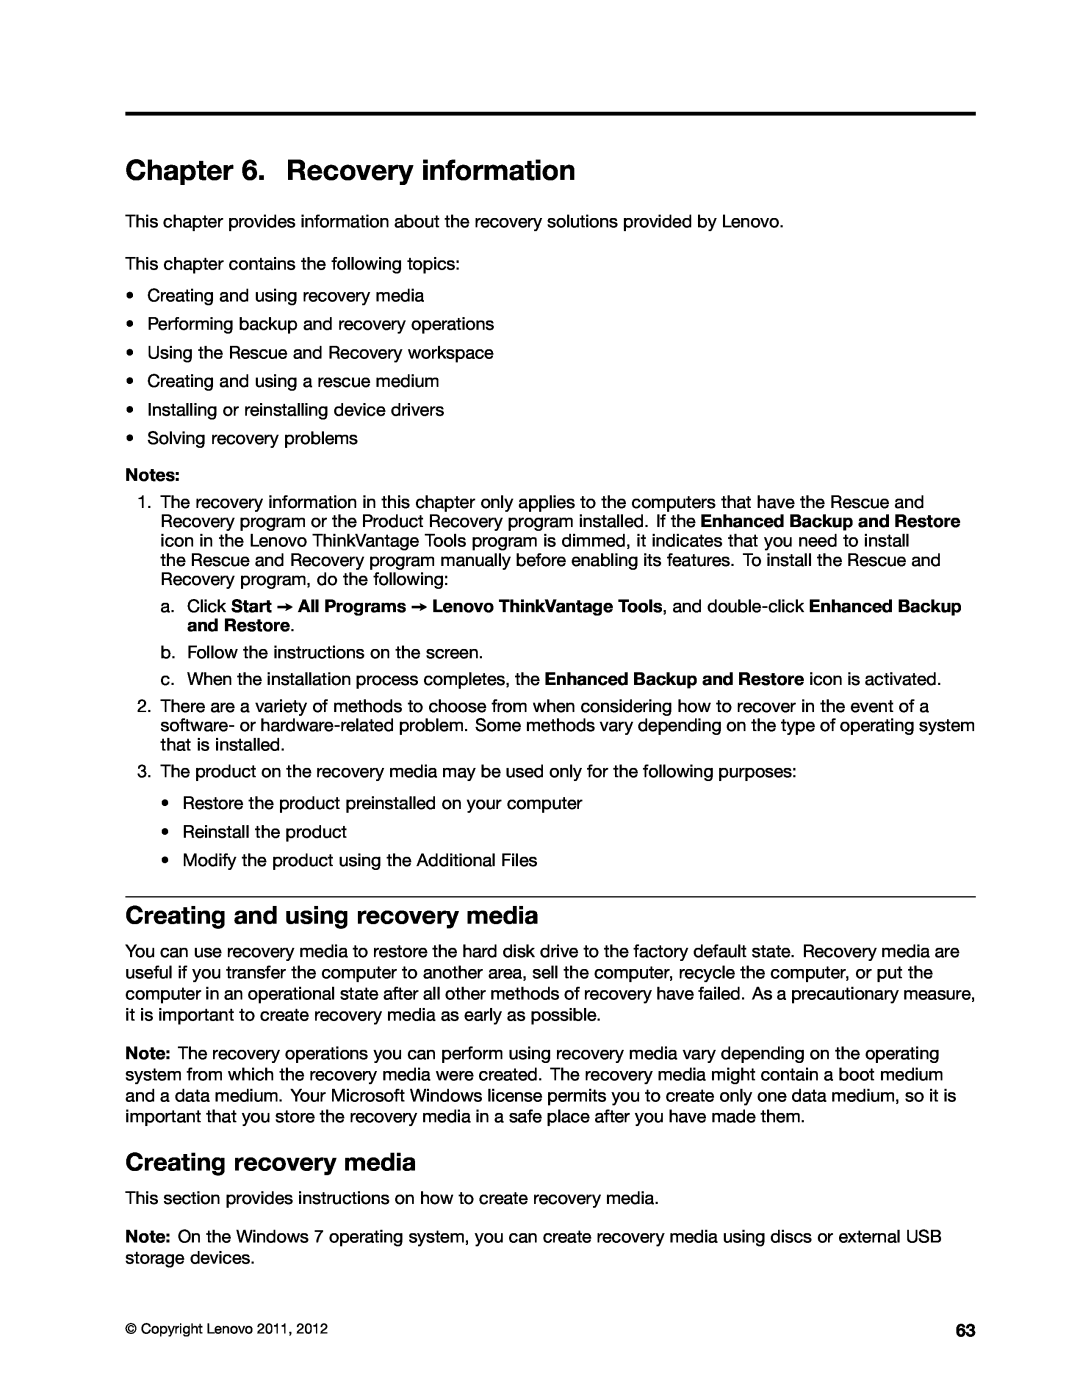 Lenovo 1994, 1993, 1995, 1986, 1985, 1987 Recovery information, Creating and using recovery media, Creating recovery media 